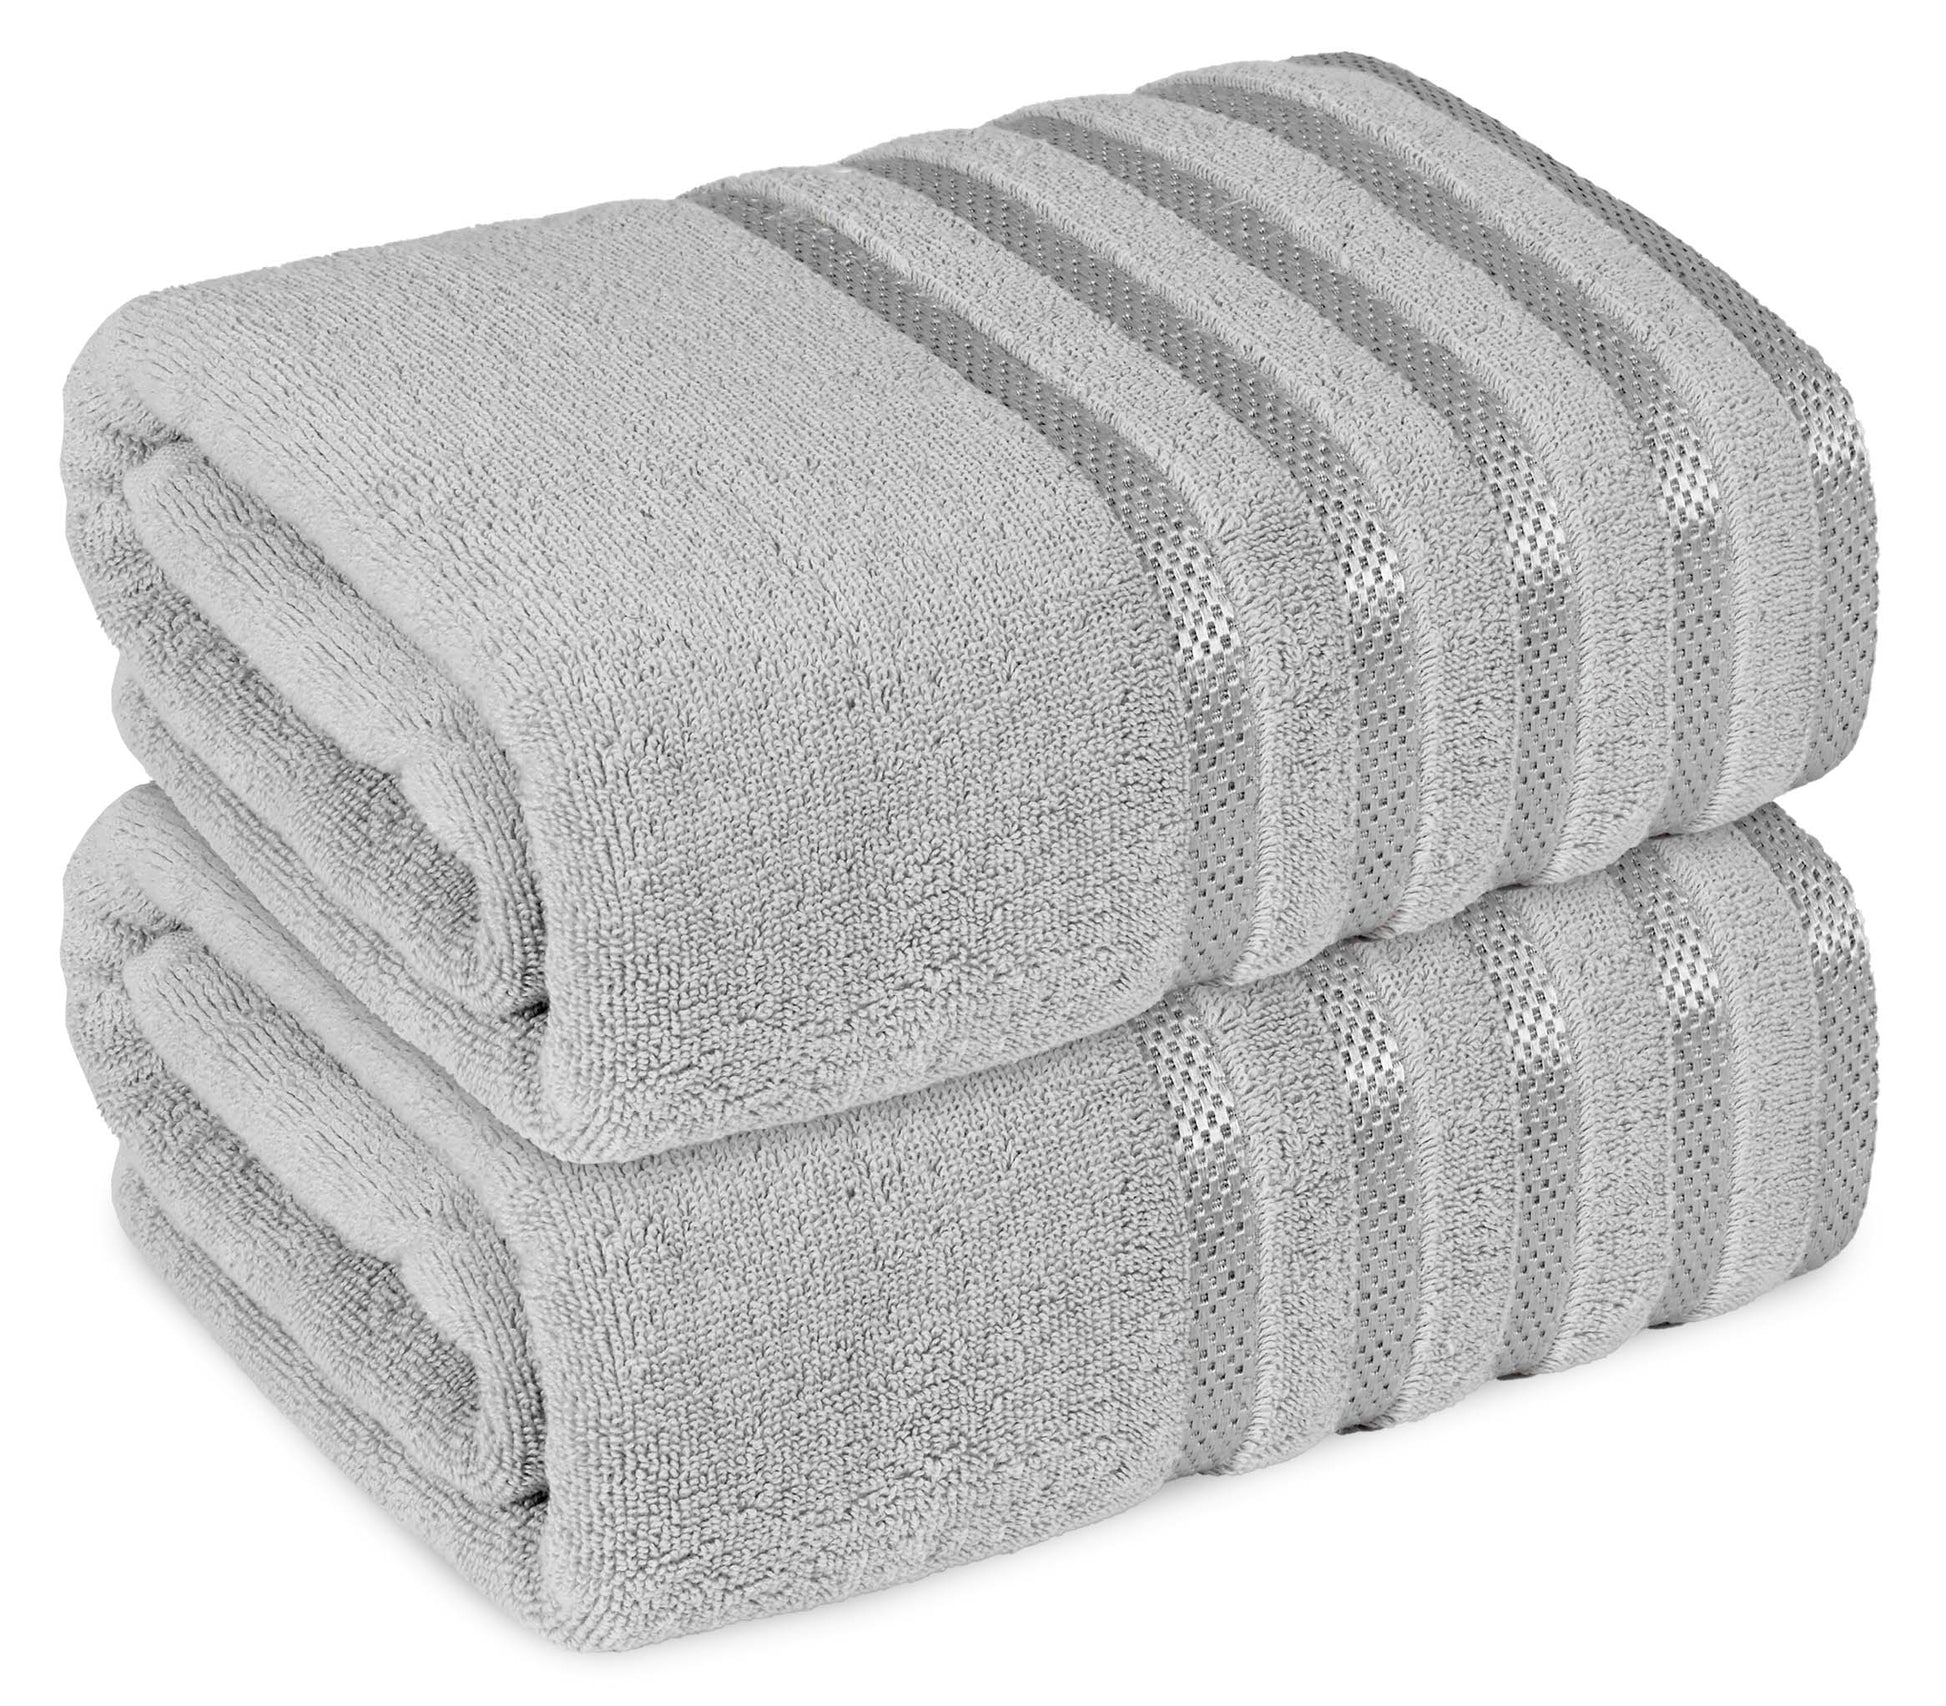 2 Pc ultrasoft and quick dry viscose bath sheet set | Eco-friendly and skin-friendly made of 100% Cotton | 2 bath sheets 90x180cm / 35x70inch-Towel Set-Weave Essentials-2x Jumbo Bath Sheet-Silver Grey-Weave Essentials